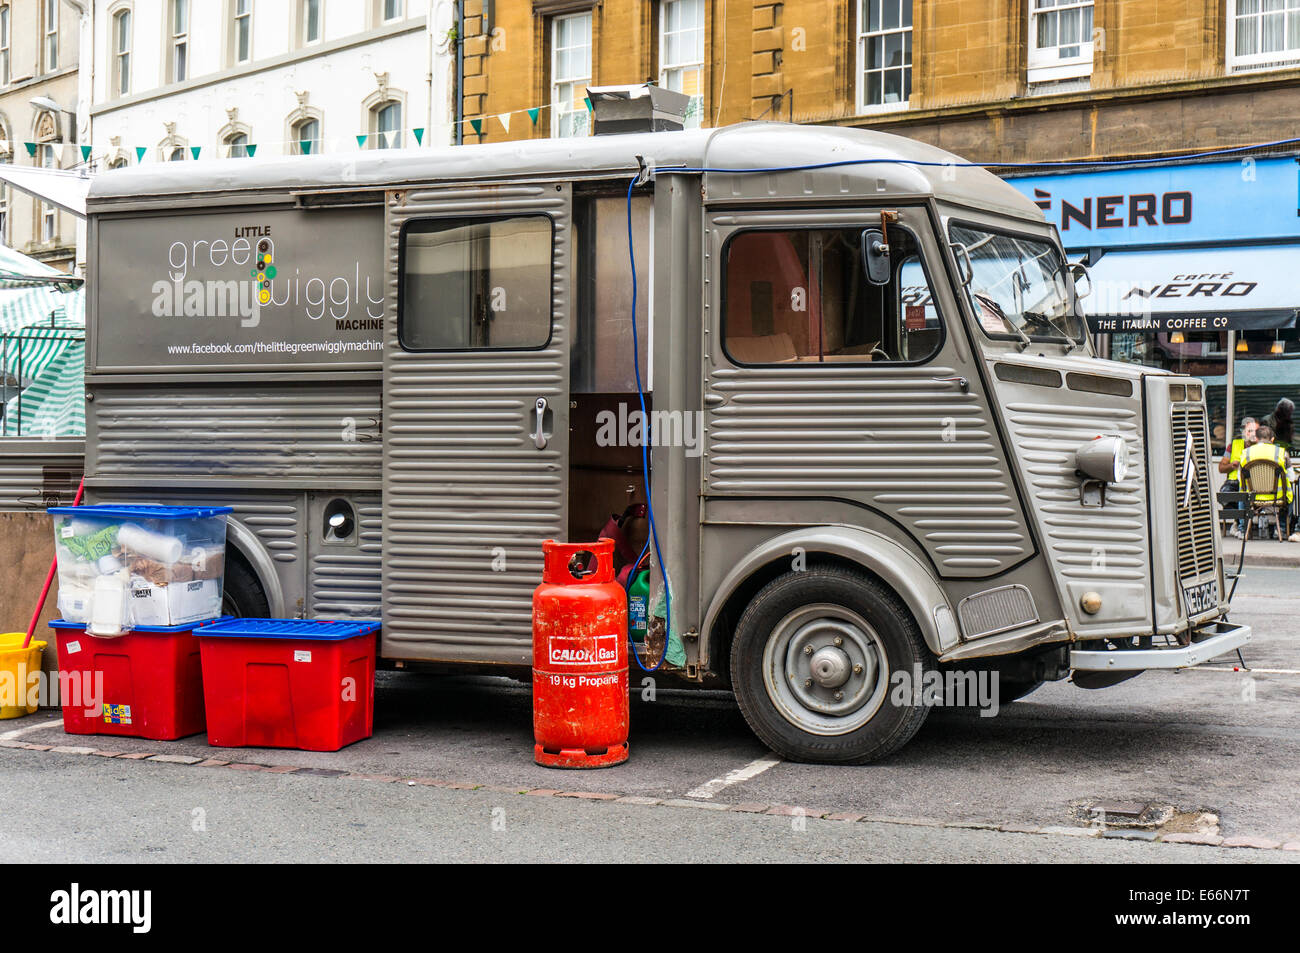 The Little Green Wiggly Machine, a specialist converted 1970's Citroen H Van, selling street food in Cirencester town, Cotswolds, England, UK. Stock Photo